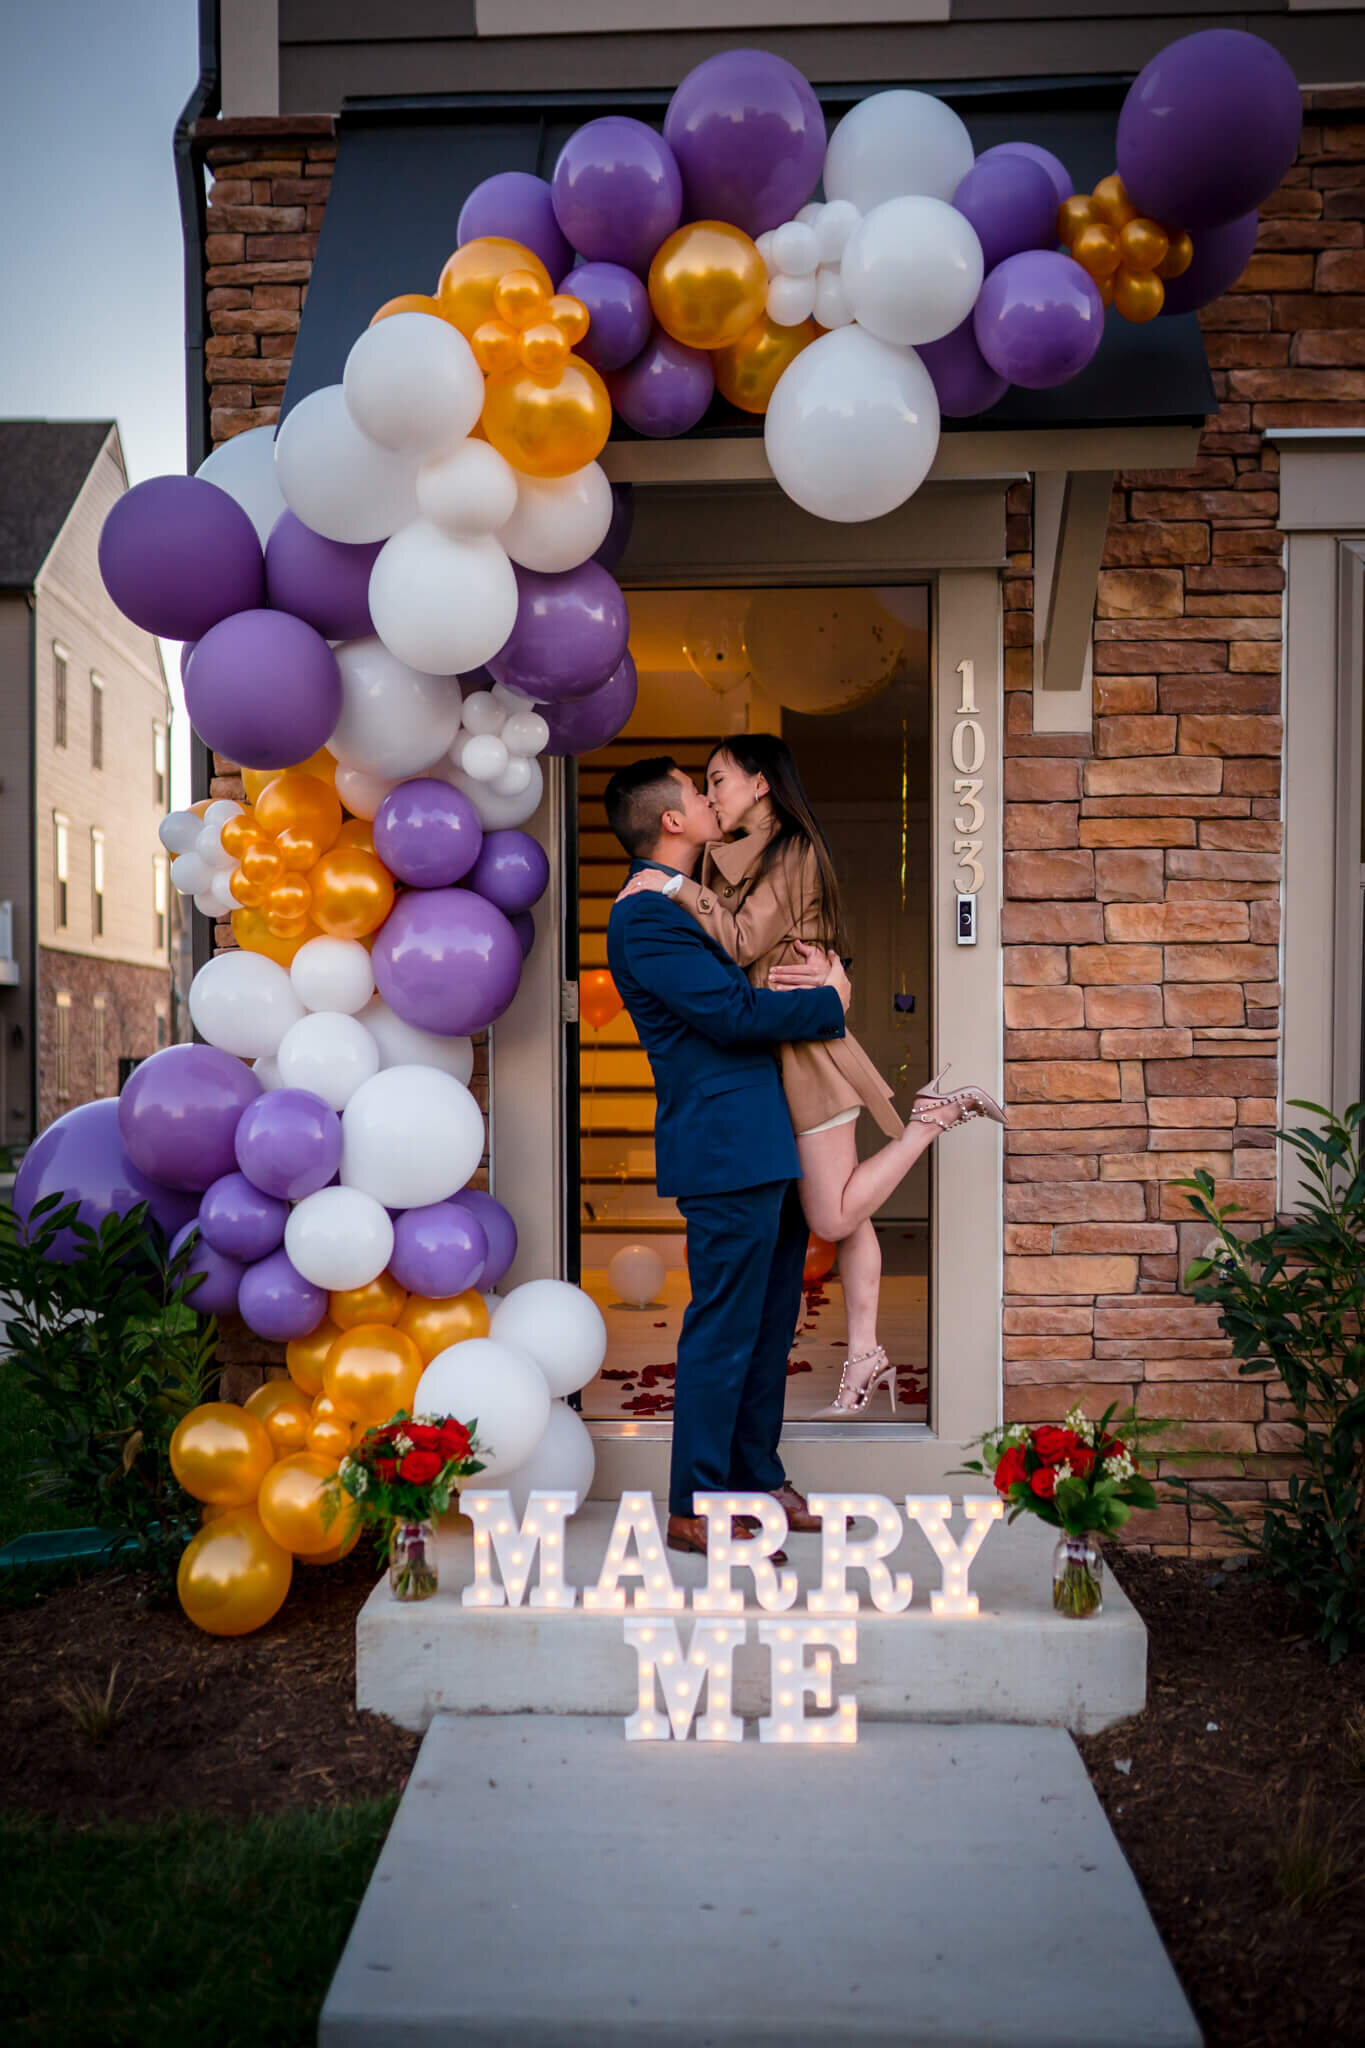 Lyla-Kingston-Surprise-Proposal-New-Home-Stanley-Martin-Homes-Leesburg-VA-Photography-by-Bee-Two-Sweet-133.jpg